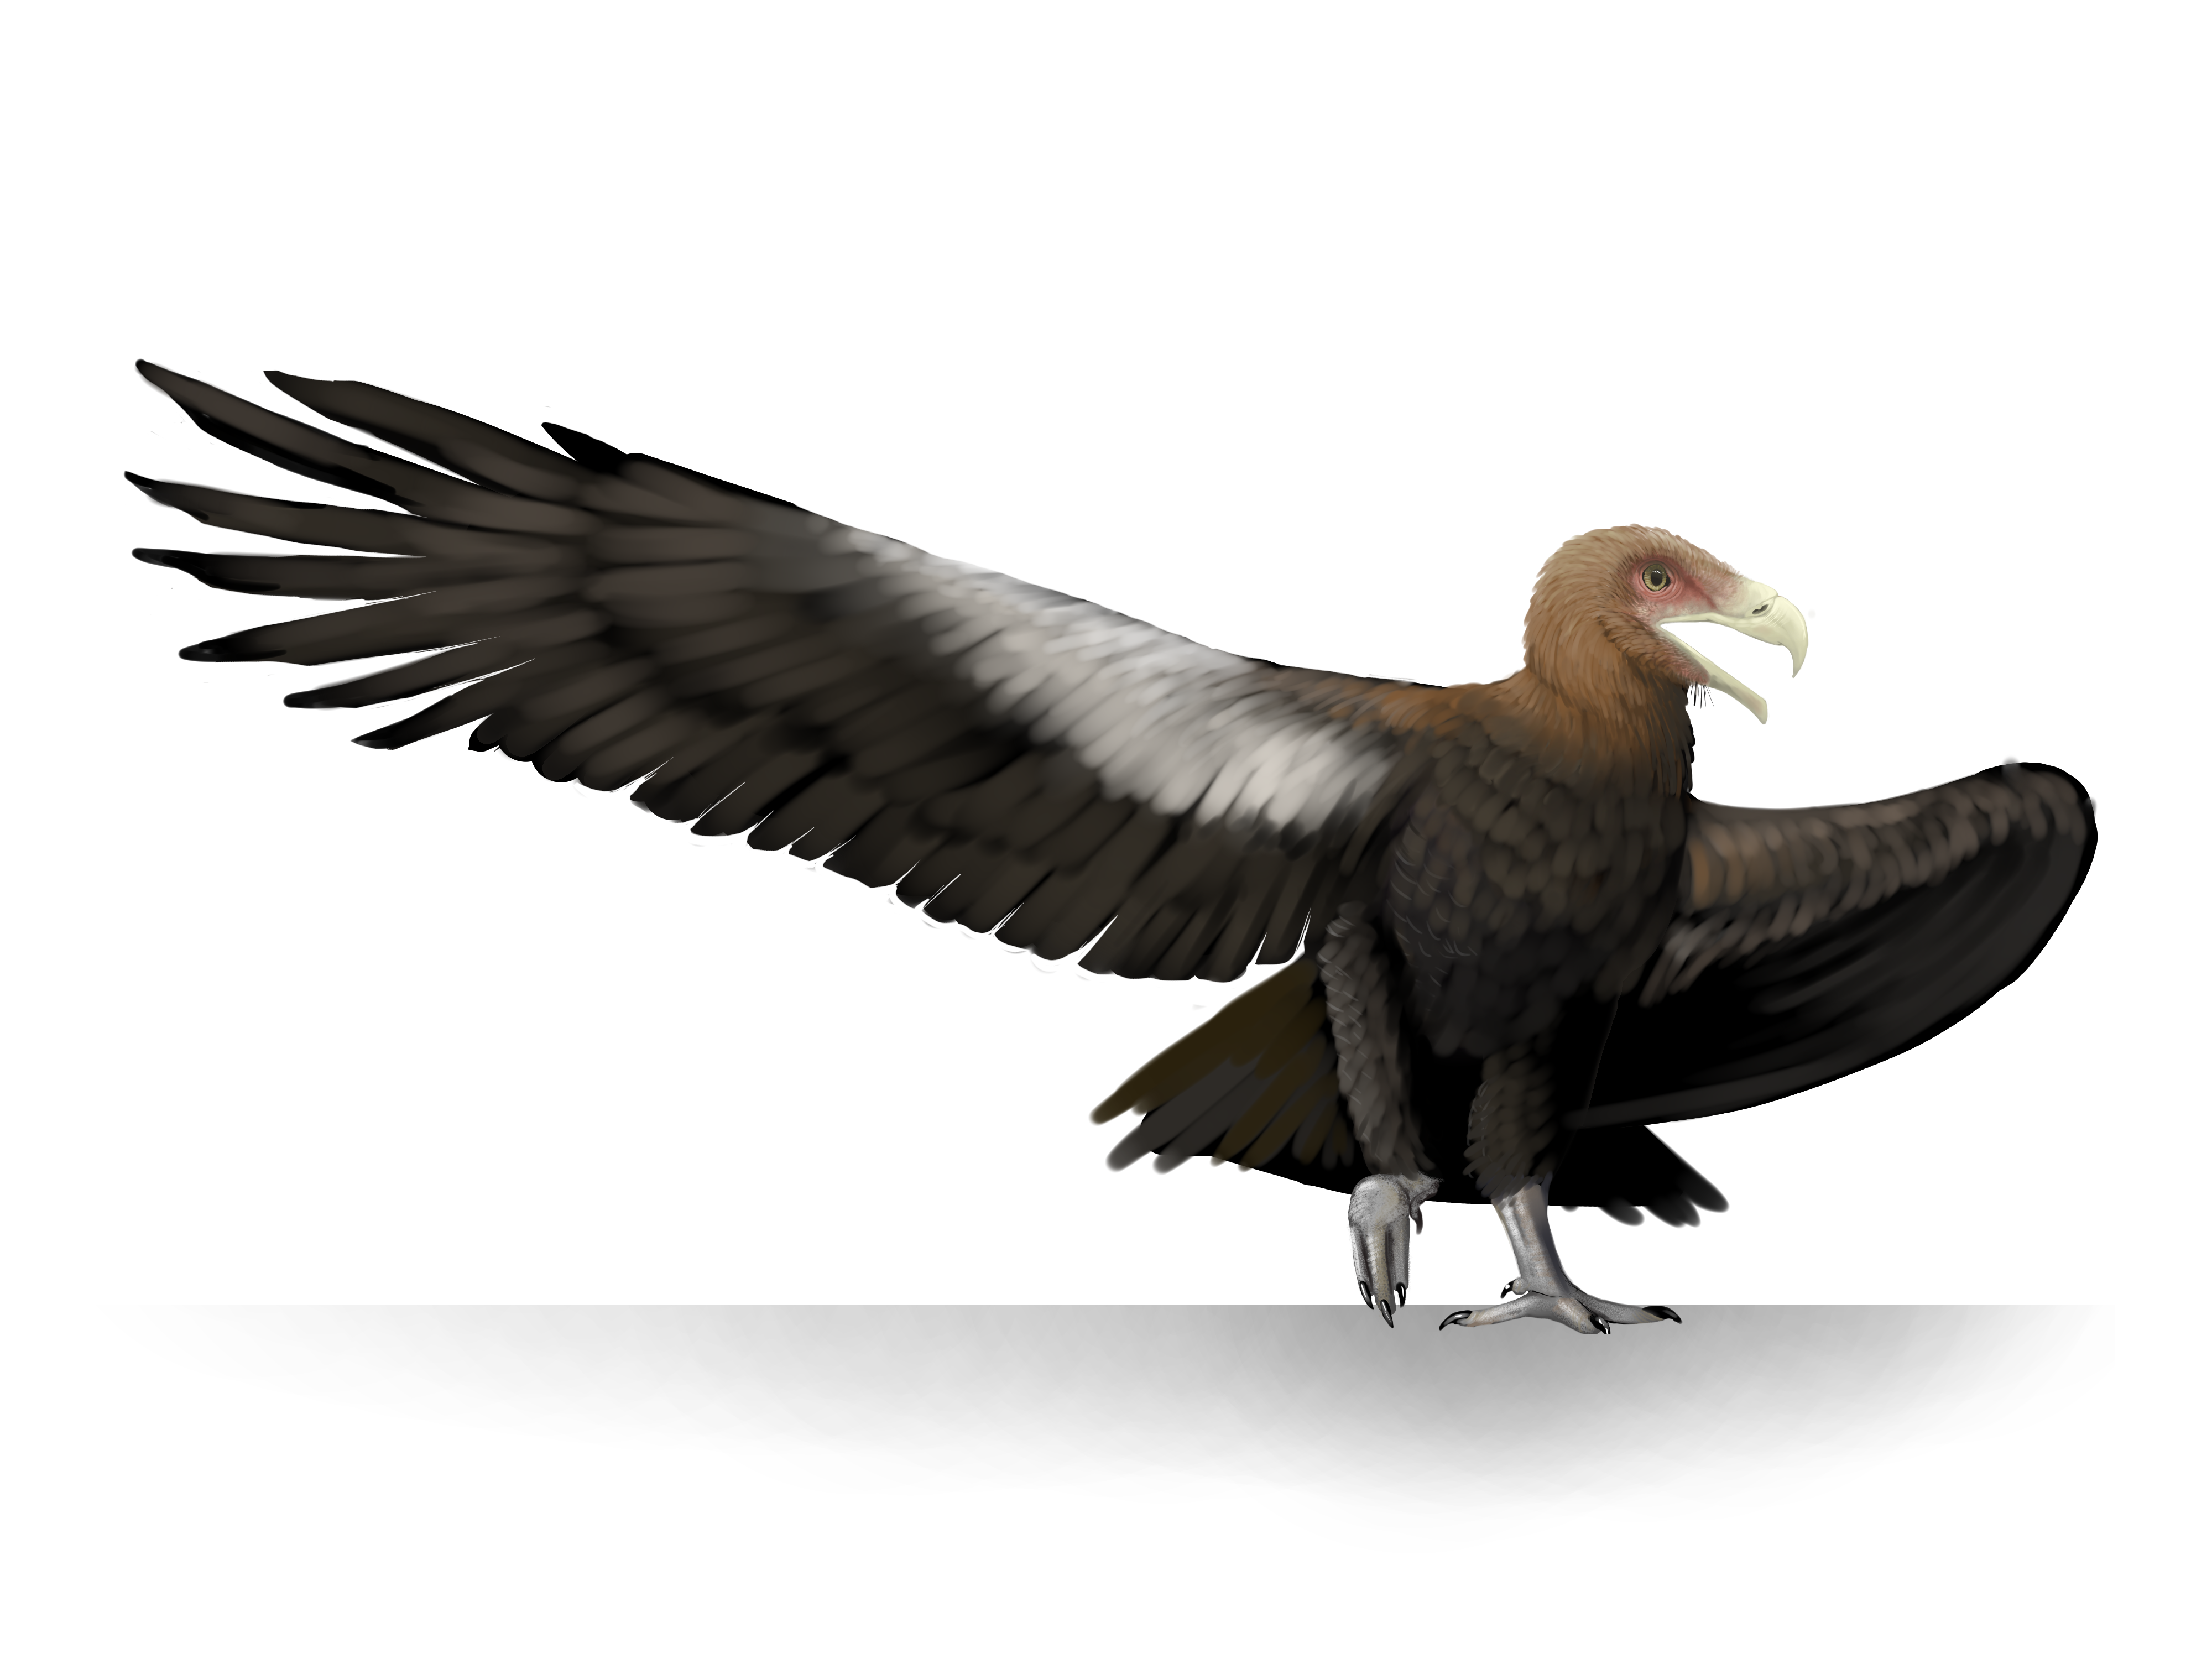 illustration of a large bird standing with wings extended